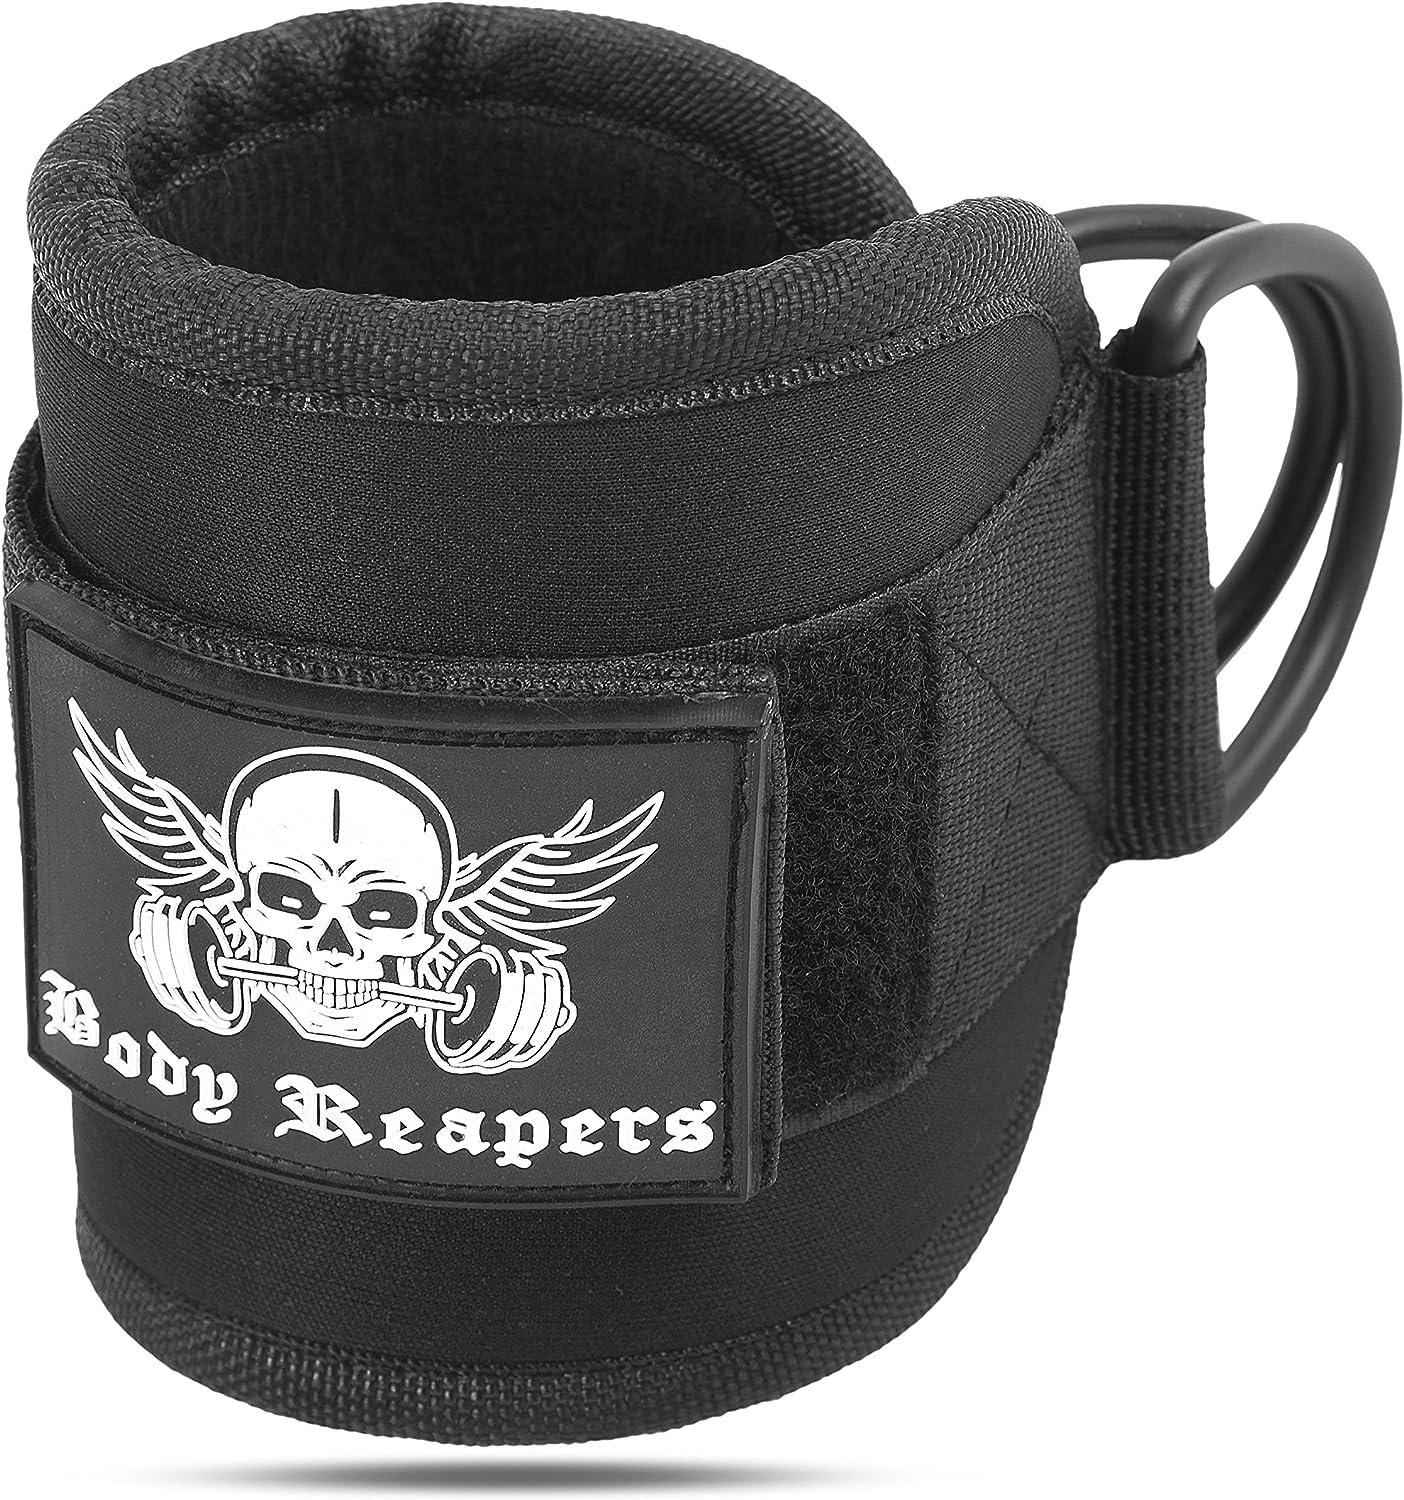 Body Reapers Ankle Straps Stealth Black, Size: Single